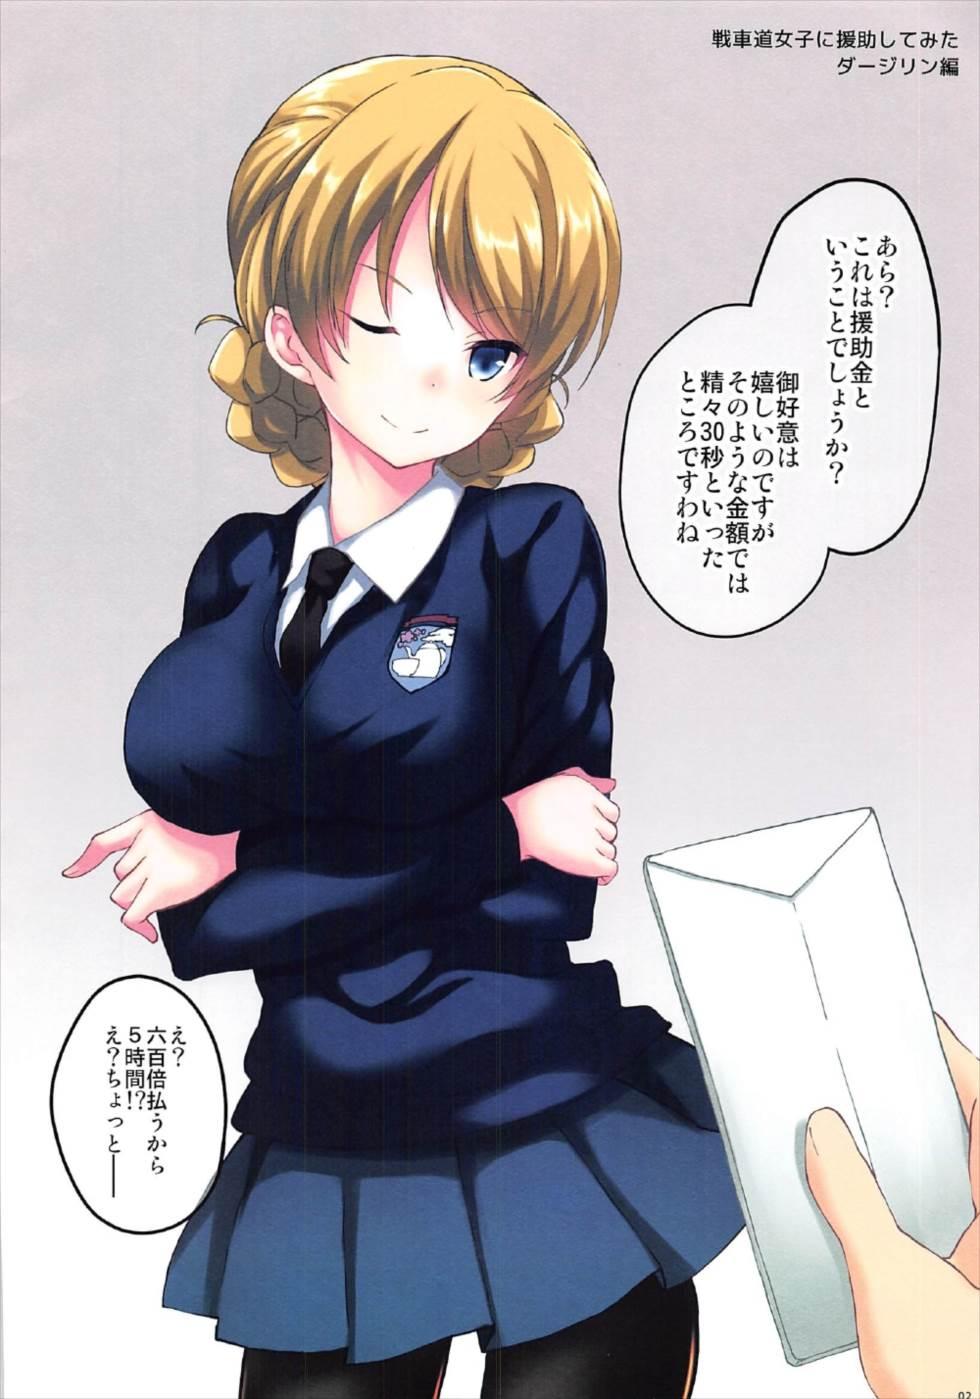 Old Young Girl’s wish - Girls und panzer Periscope - Page 2